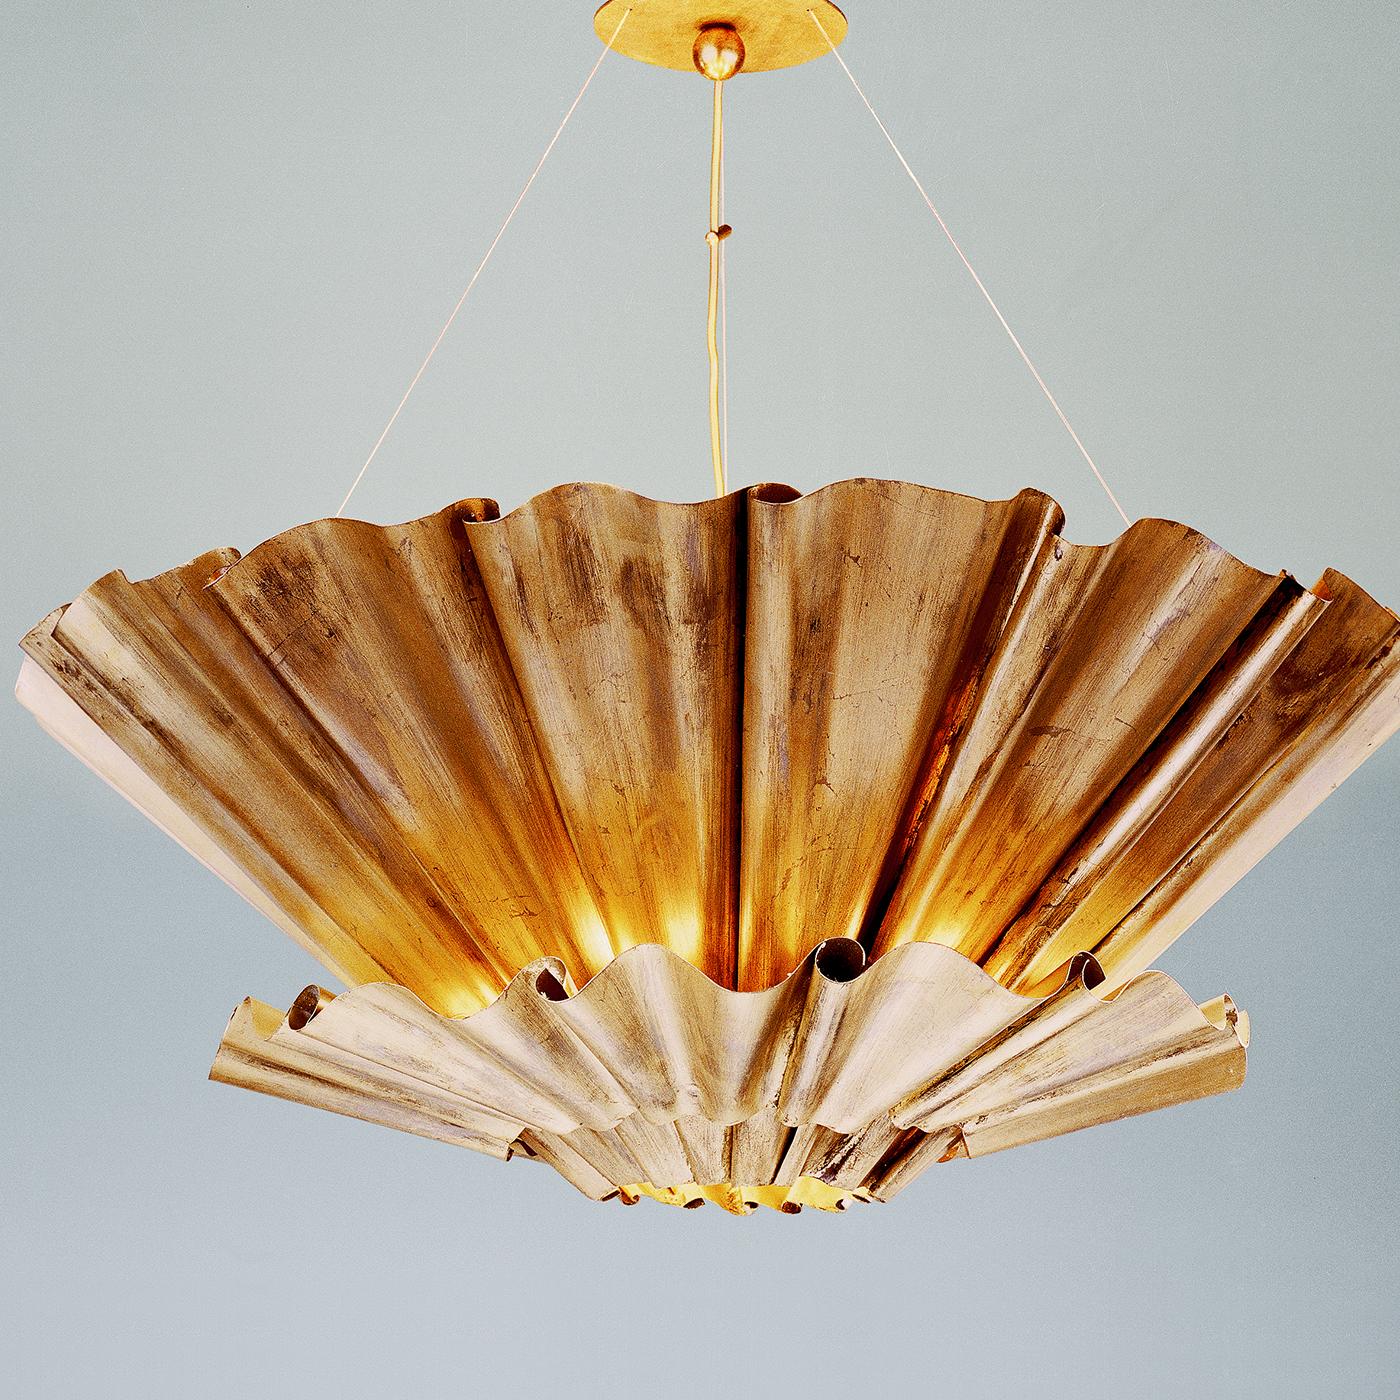 This magnificent chandelier from the Conchiglia collection (meaning 